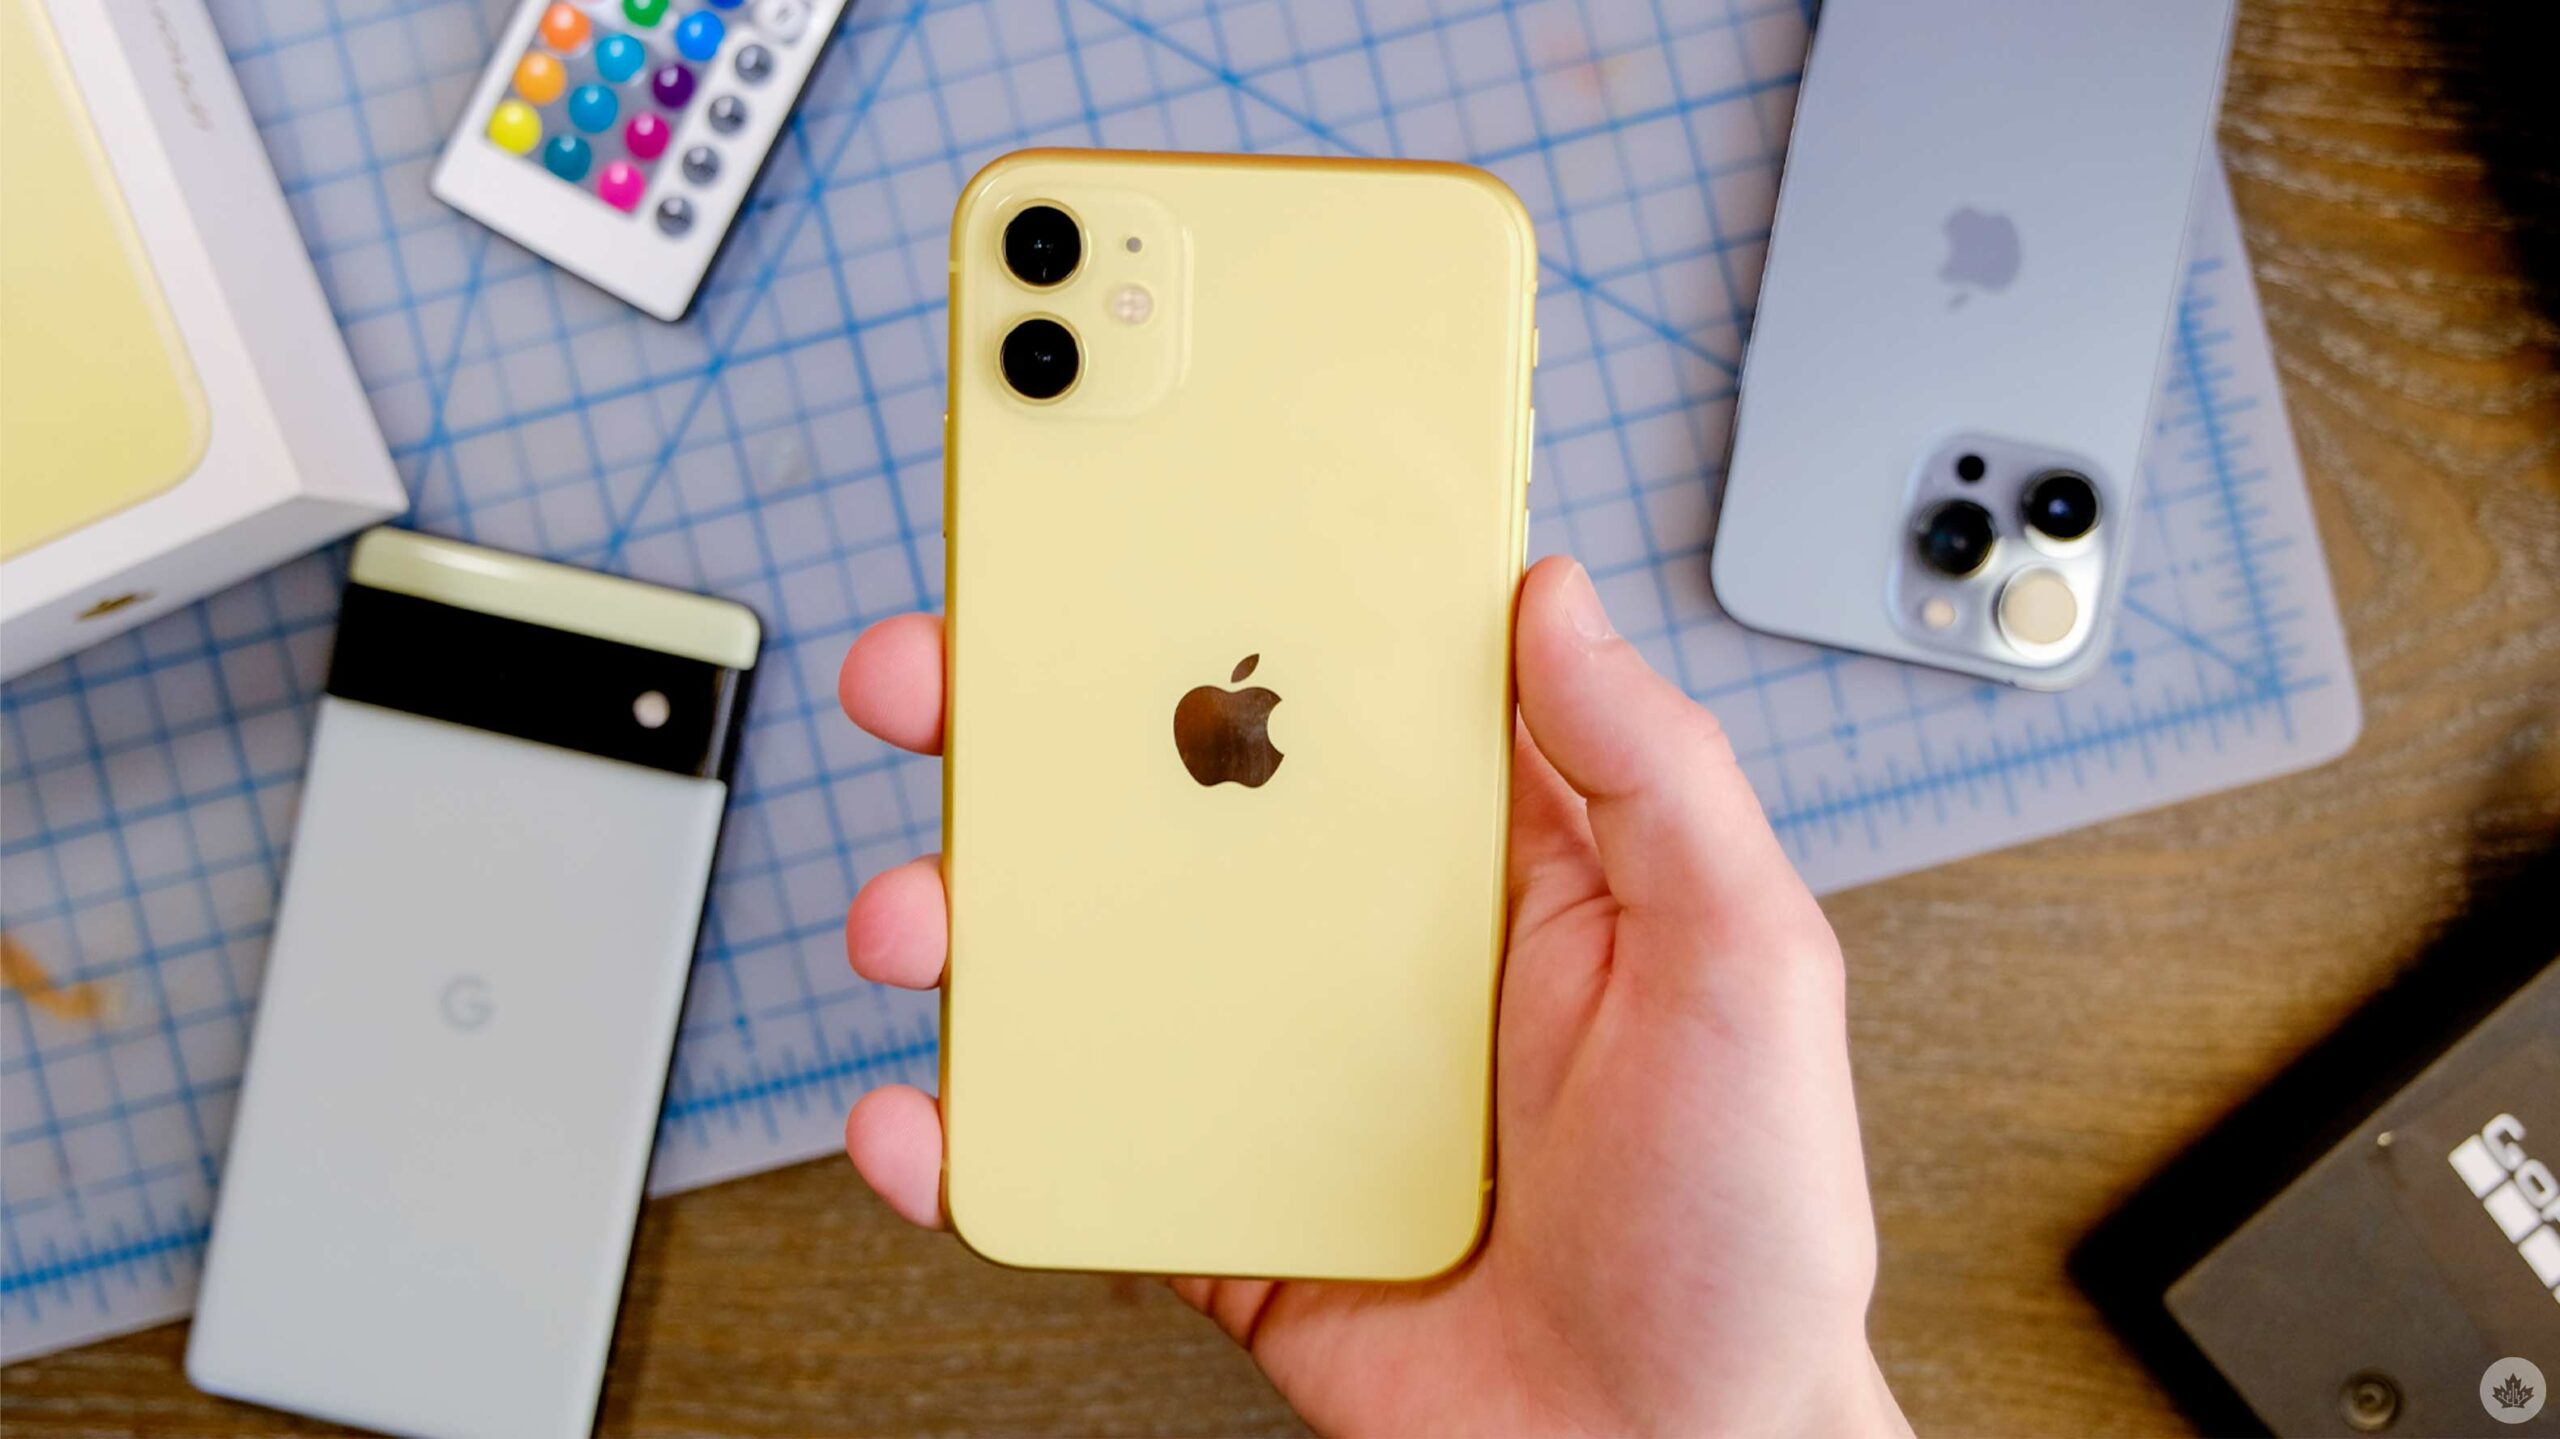 Apple's iPhone 11 secretly offers the best iPhone value